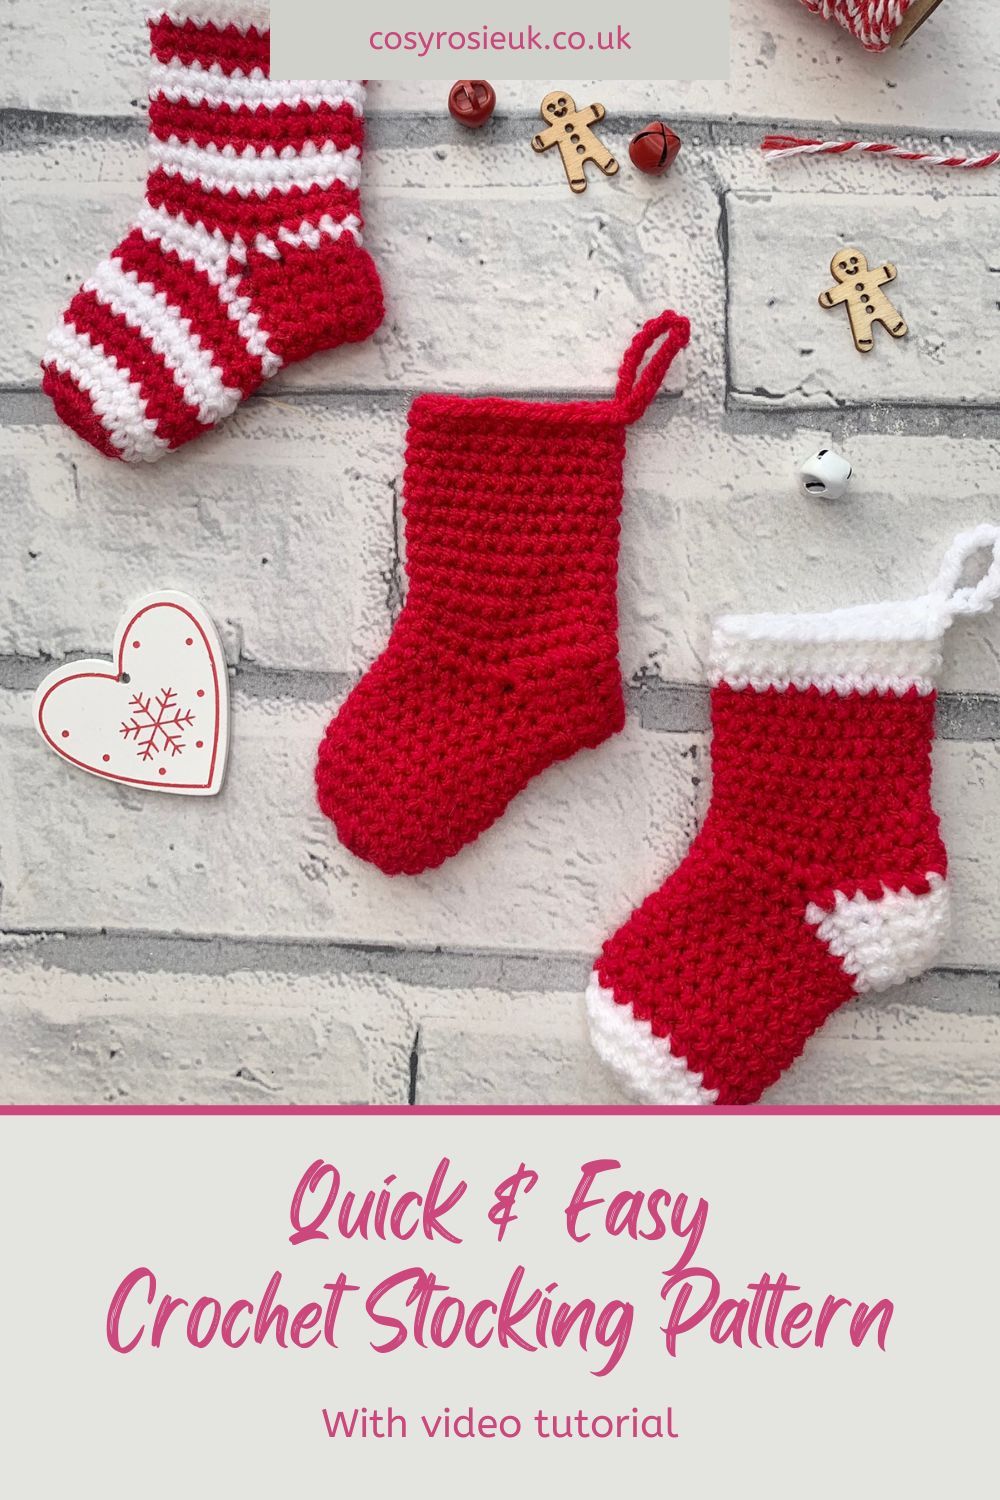 Easy Crochet Stocking Pattern free with video tutoral